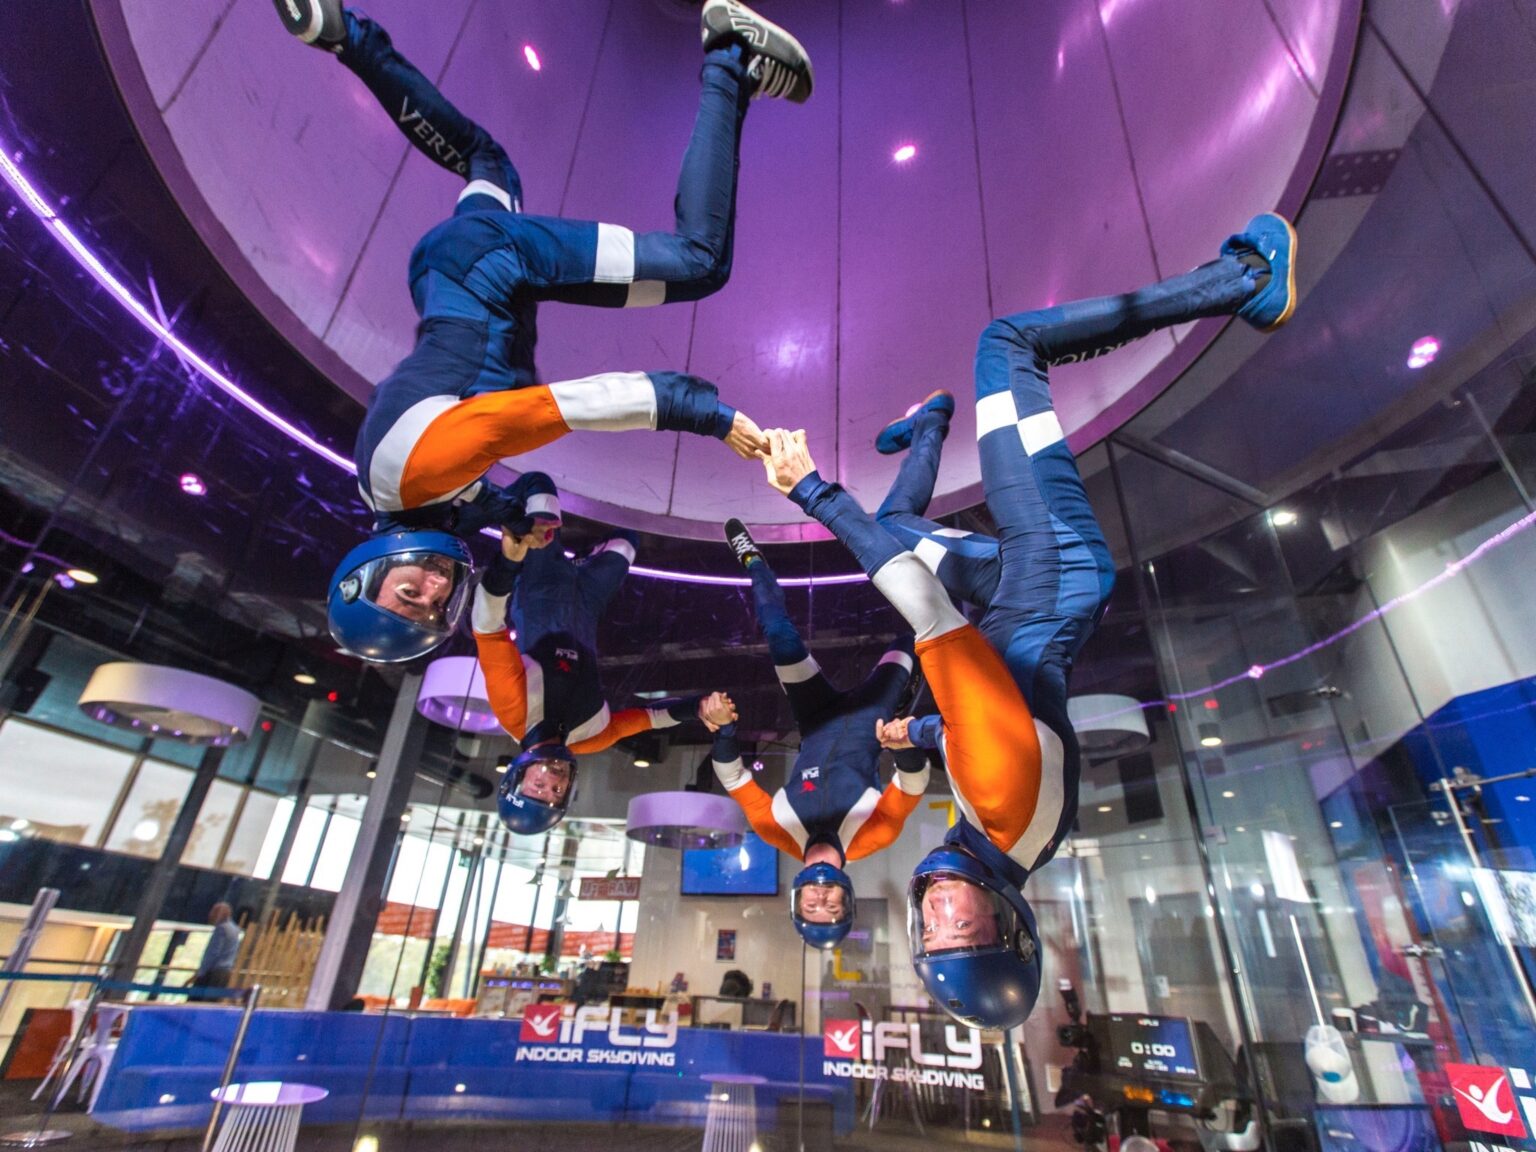 Sydney indoor skydiving; My Experience, How Much it Cost and Where!